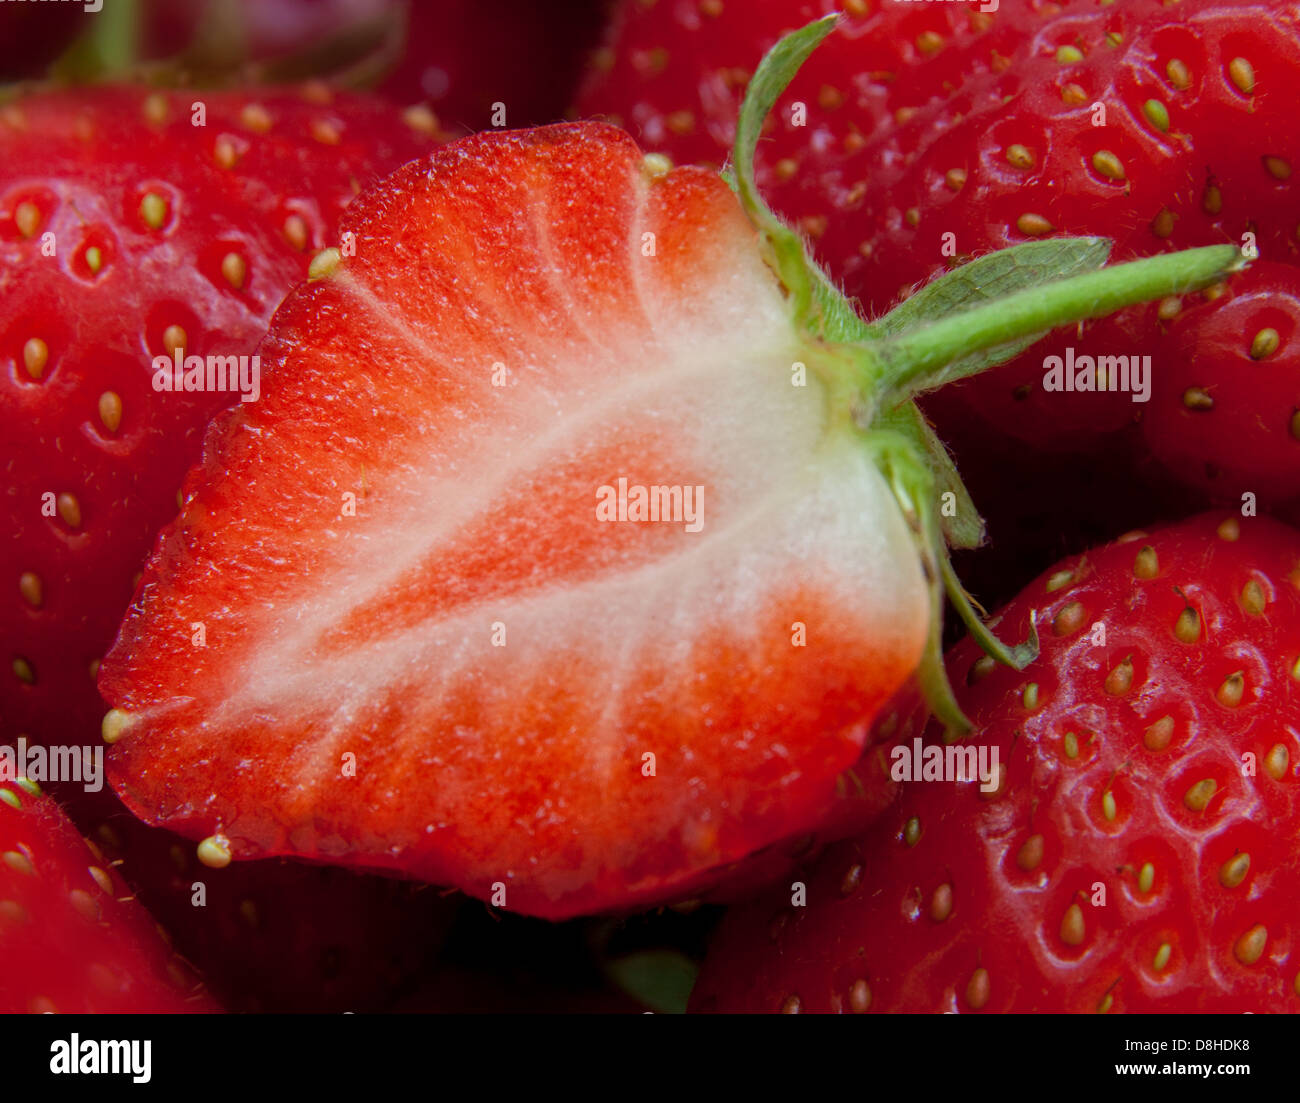 British Strawberries such a brilliant red summer fruit! Close up of a fruit cut in half, showing seeds Stock Photo